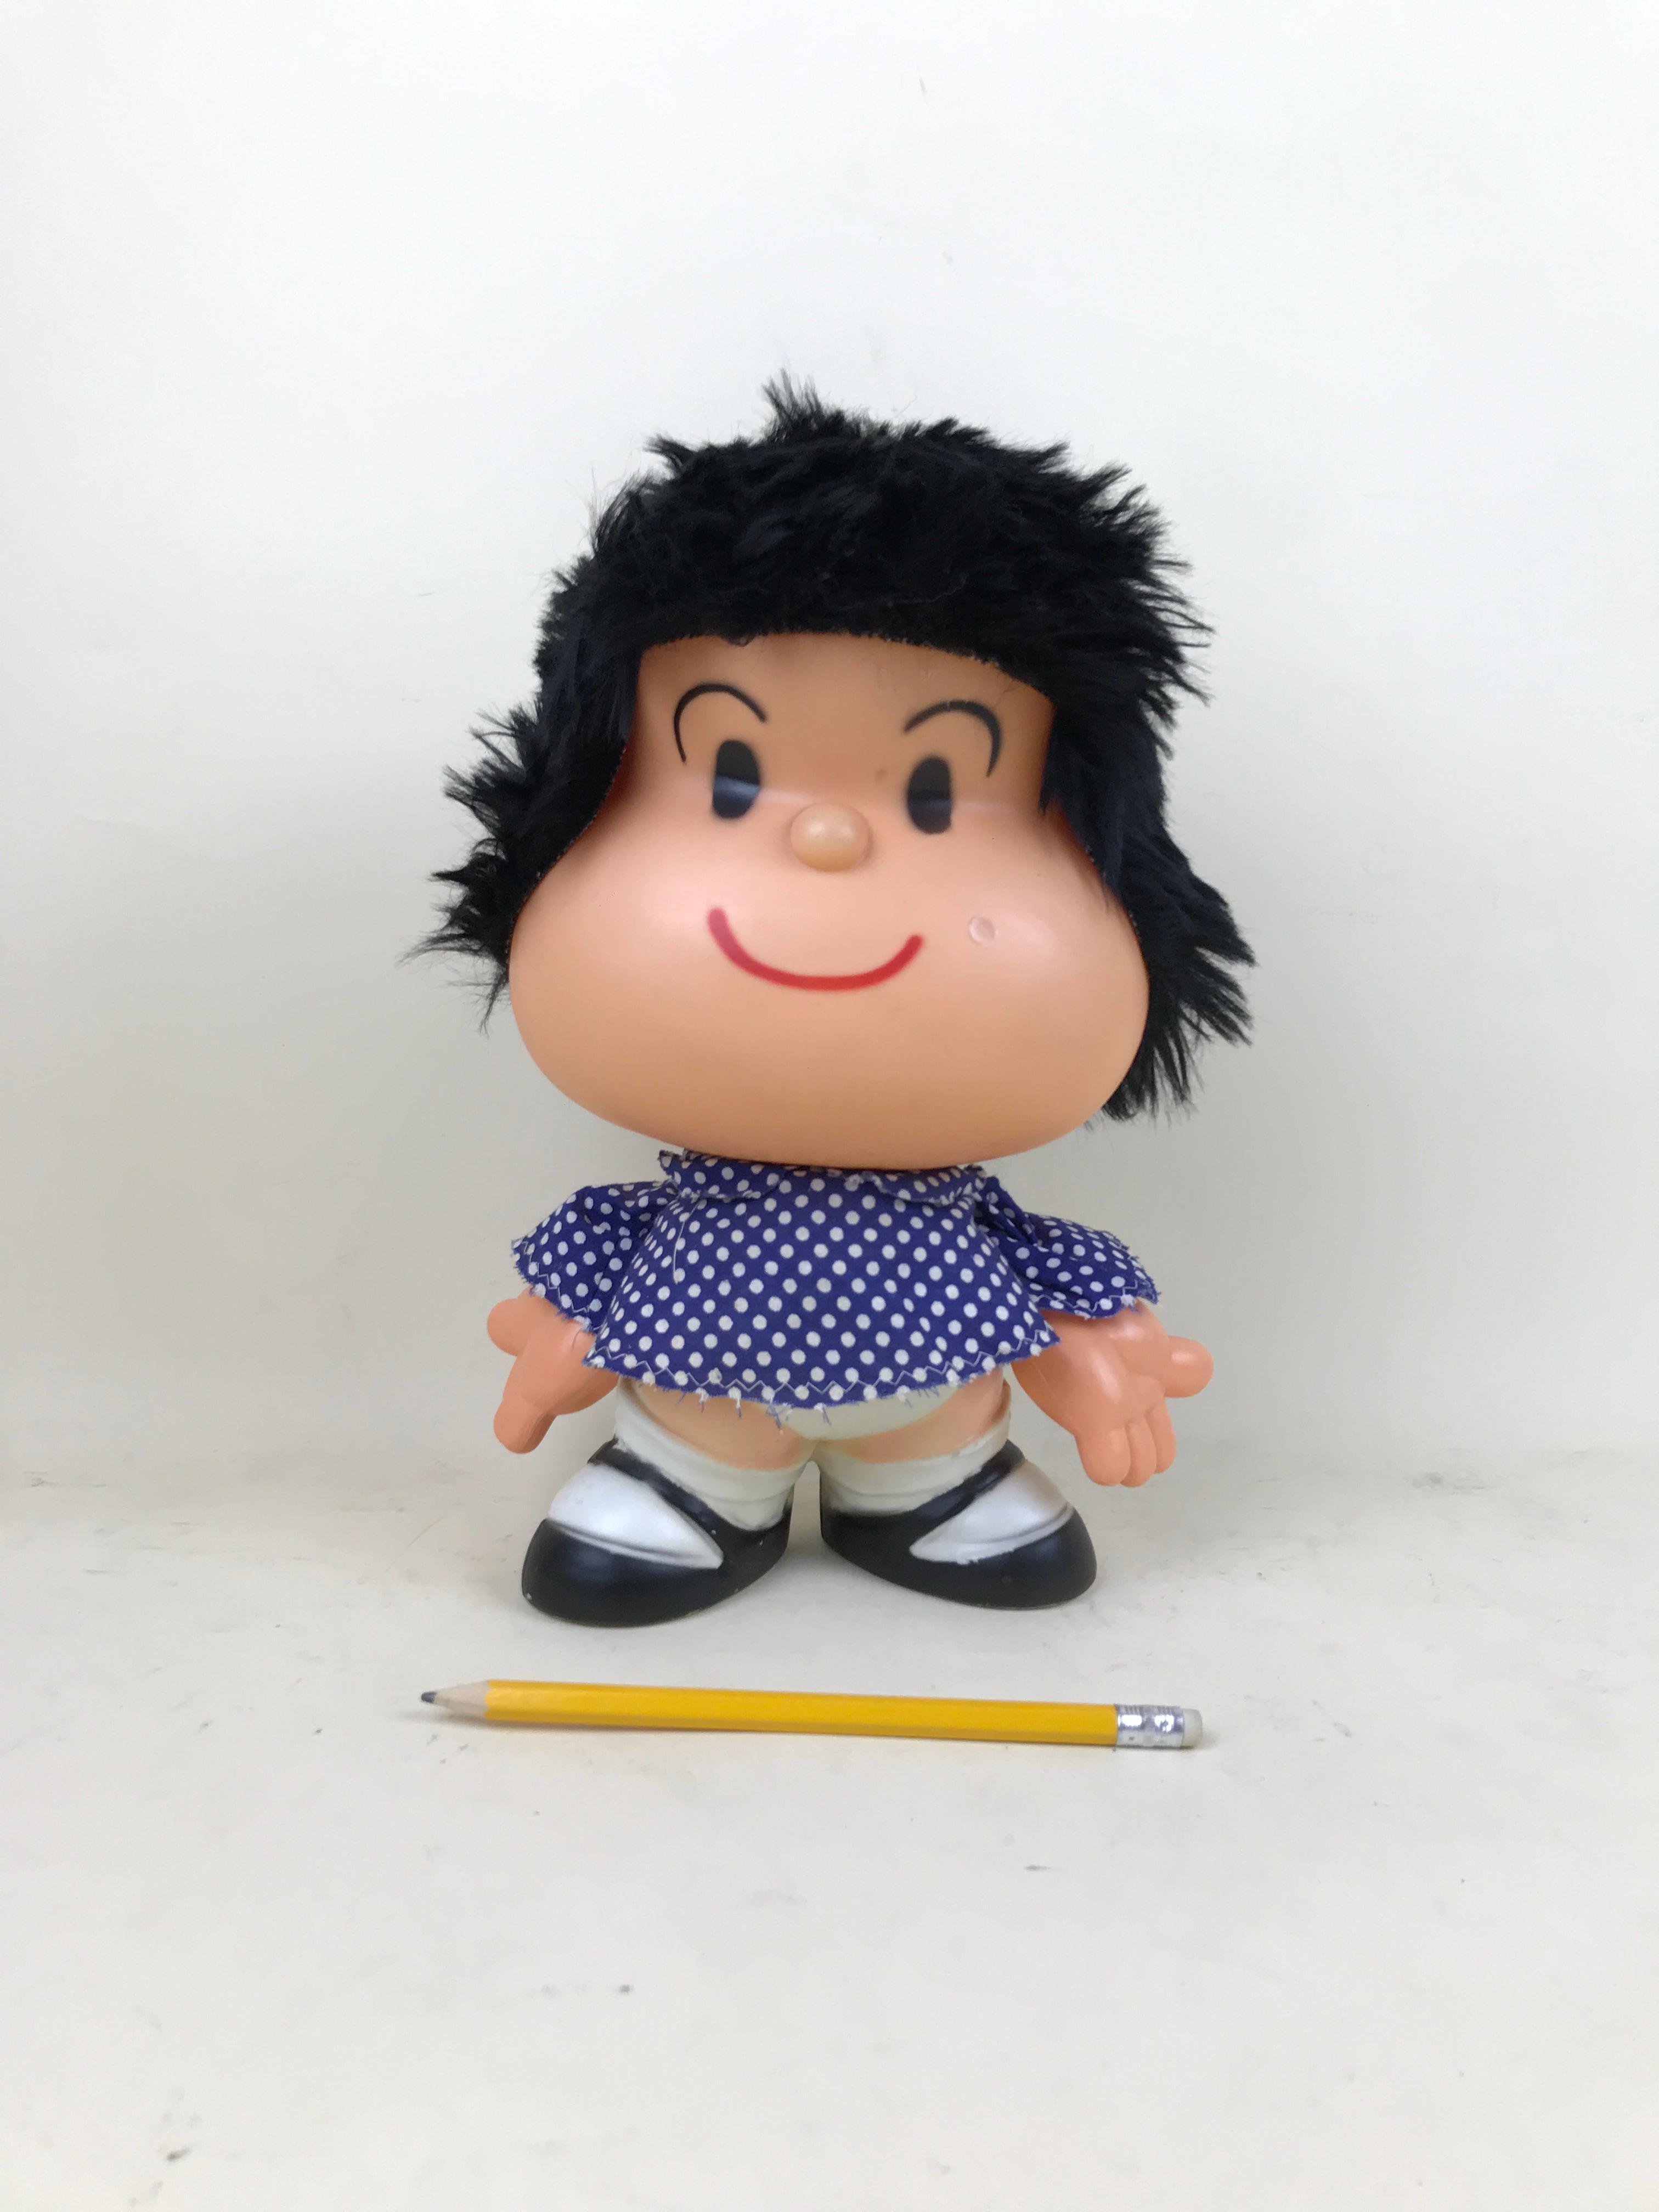 This vintage Mafalda doll was part of series of collectable puppets made by Italian sweet company Sperlari in the 1960s and 1970s.

The toy is realized in hard plastic and fabric.

Collector's note:

Mafalda is an Argentine comic strip written